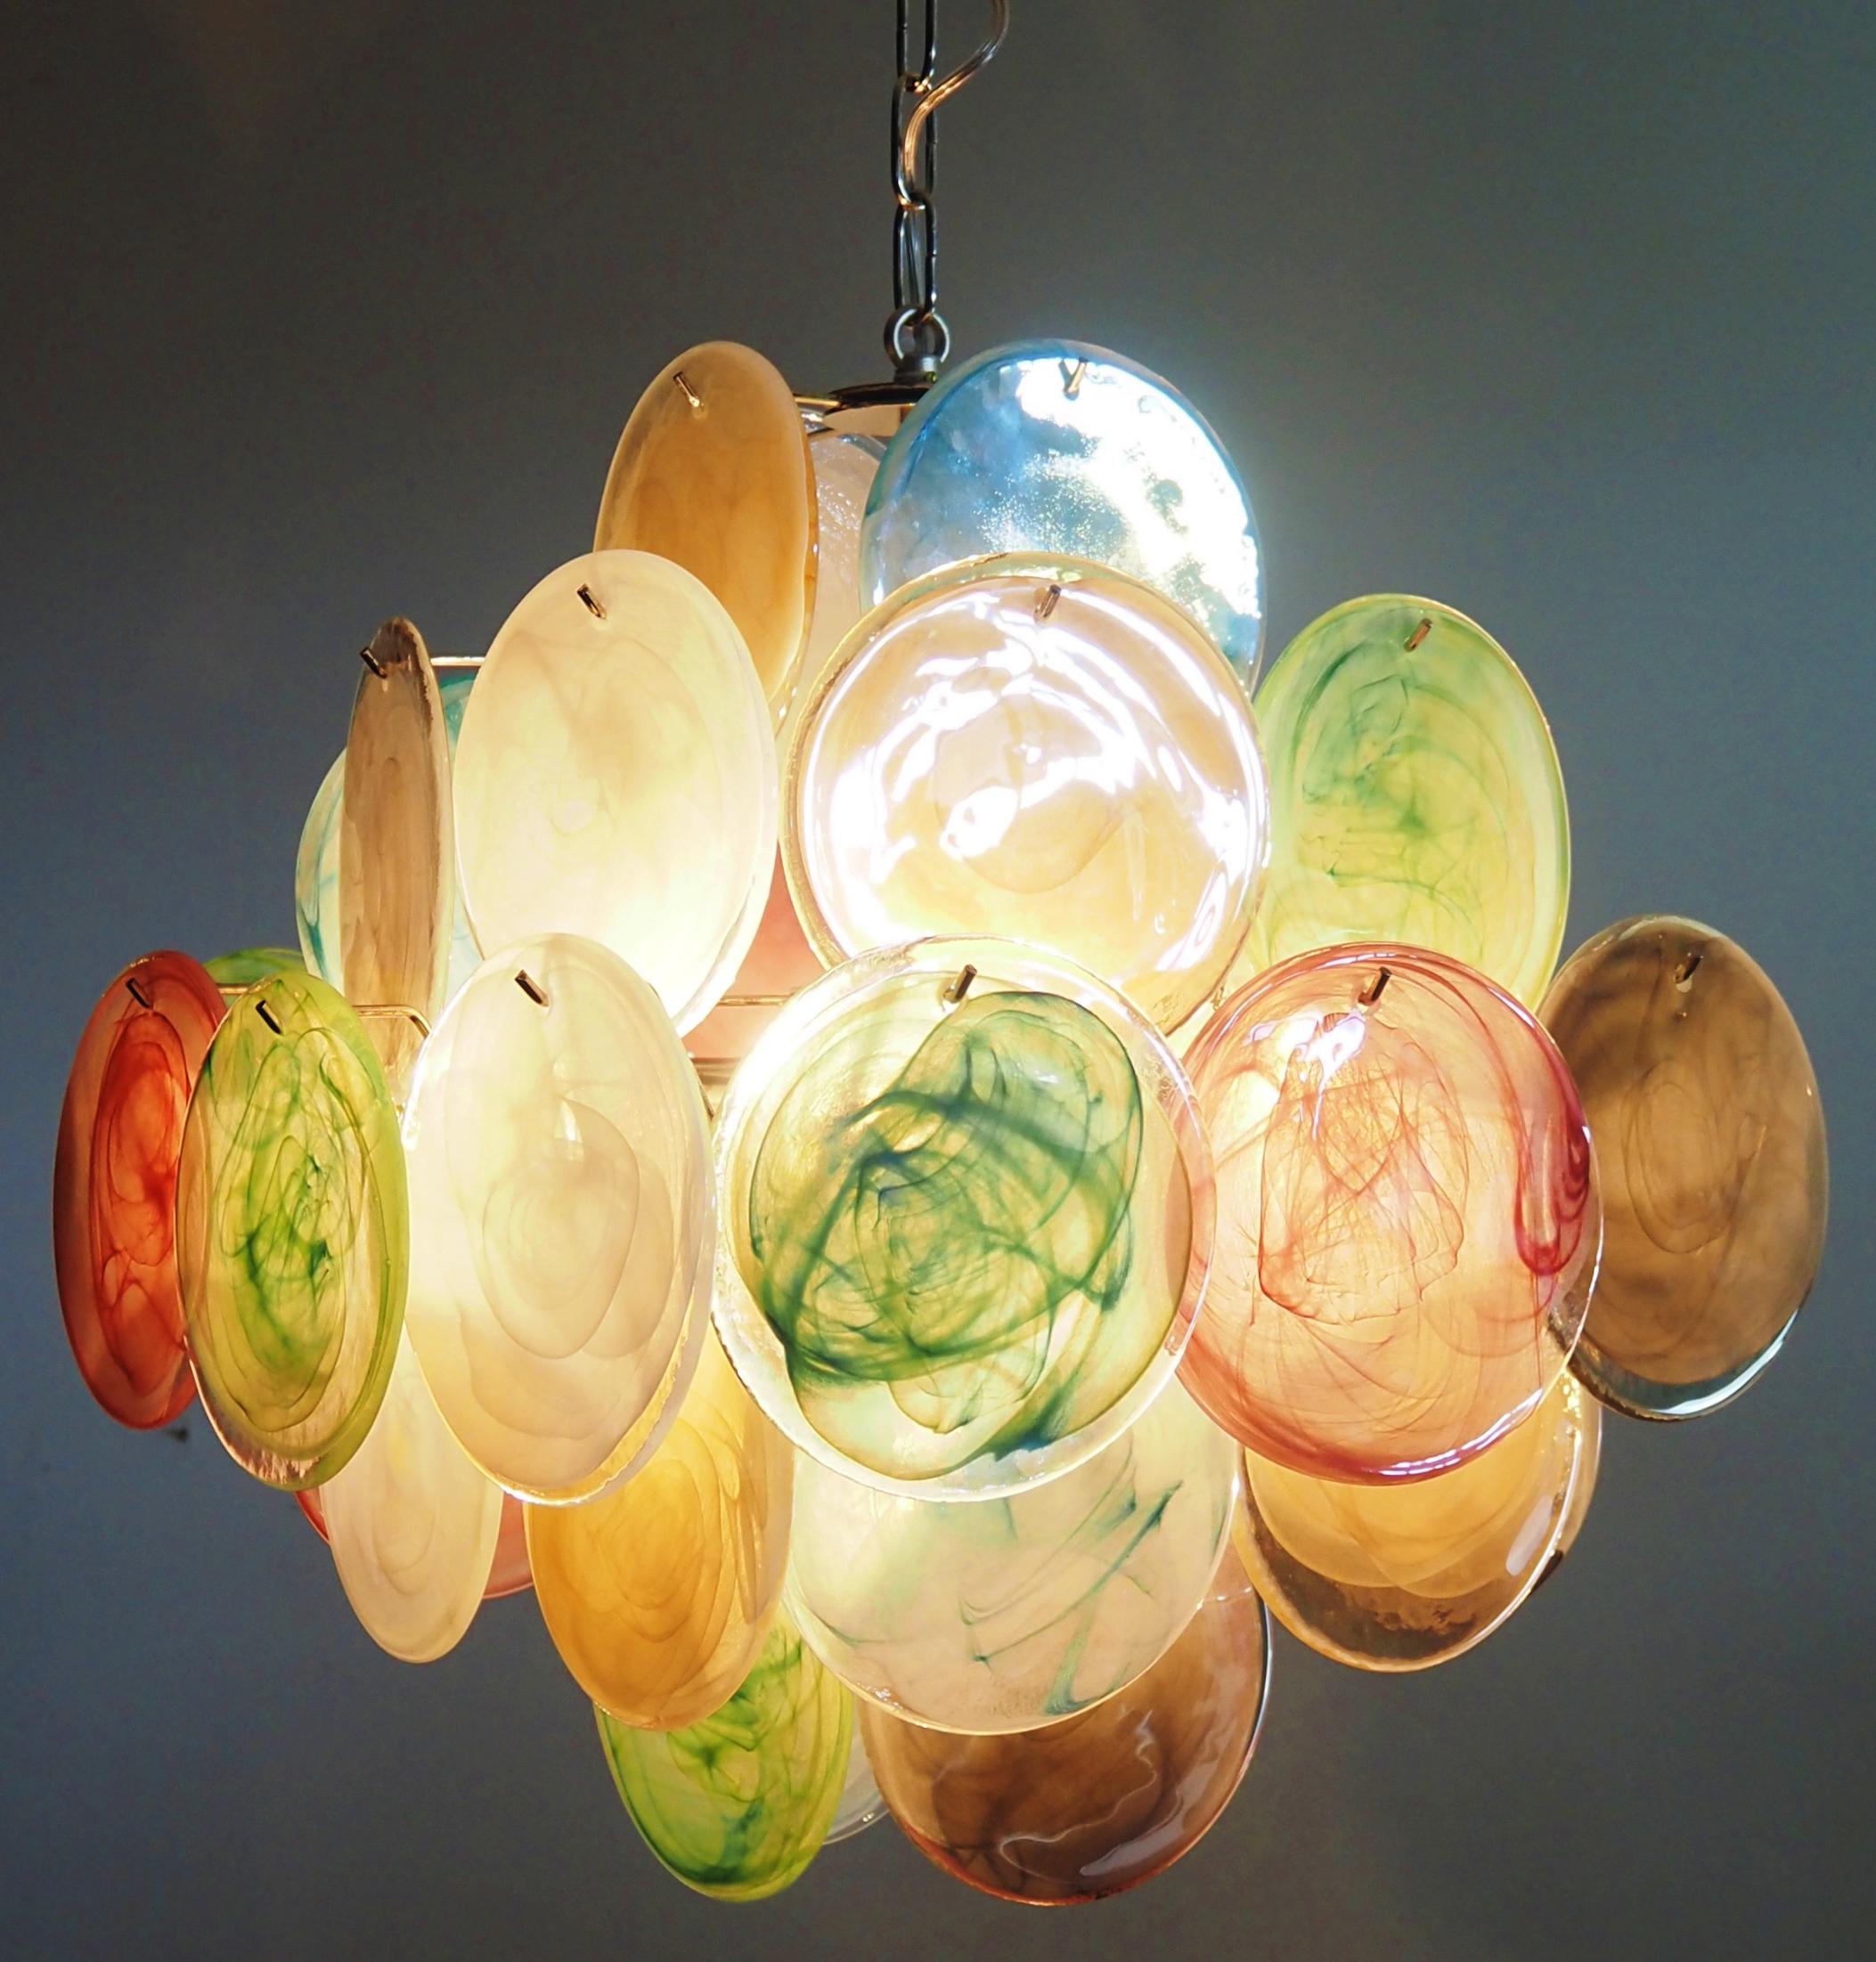 Art Glass Beautiful Vintage Italian Murano chandeliers - 36 alabaster multicolored disks For Sale